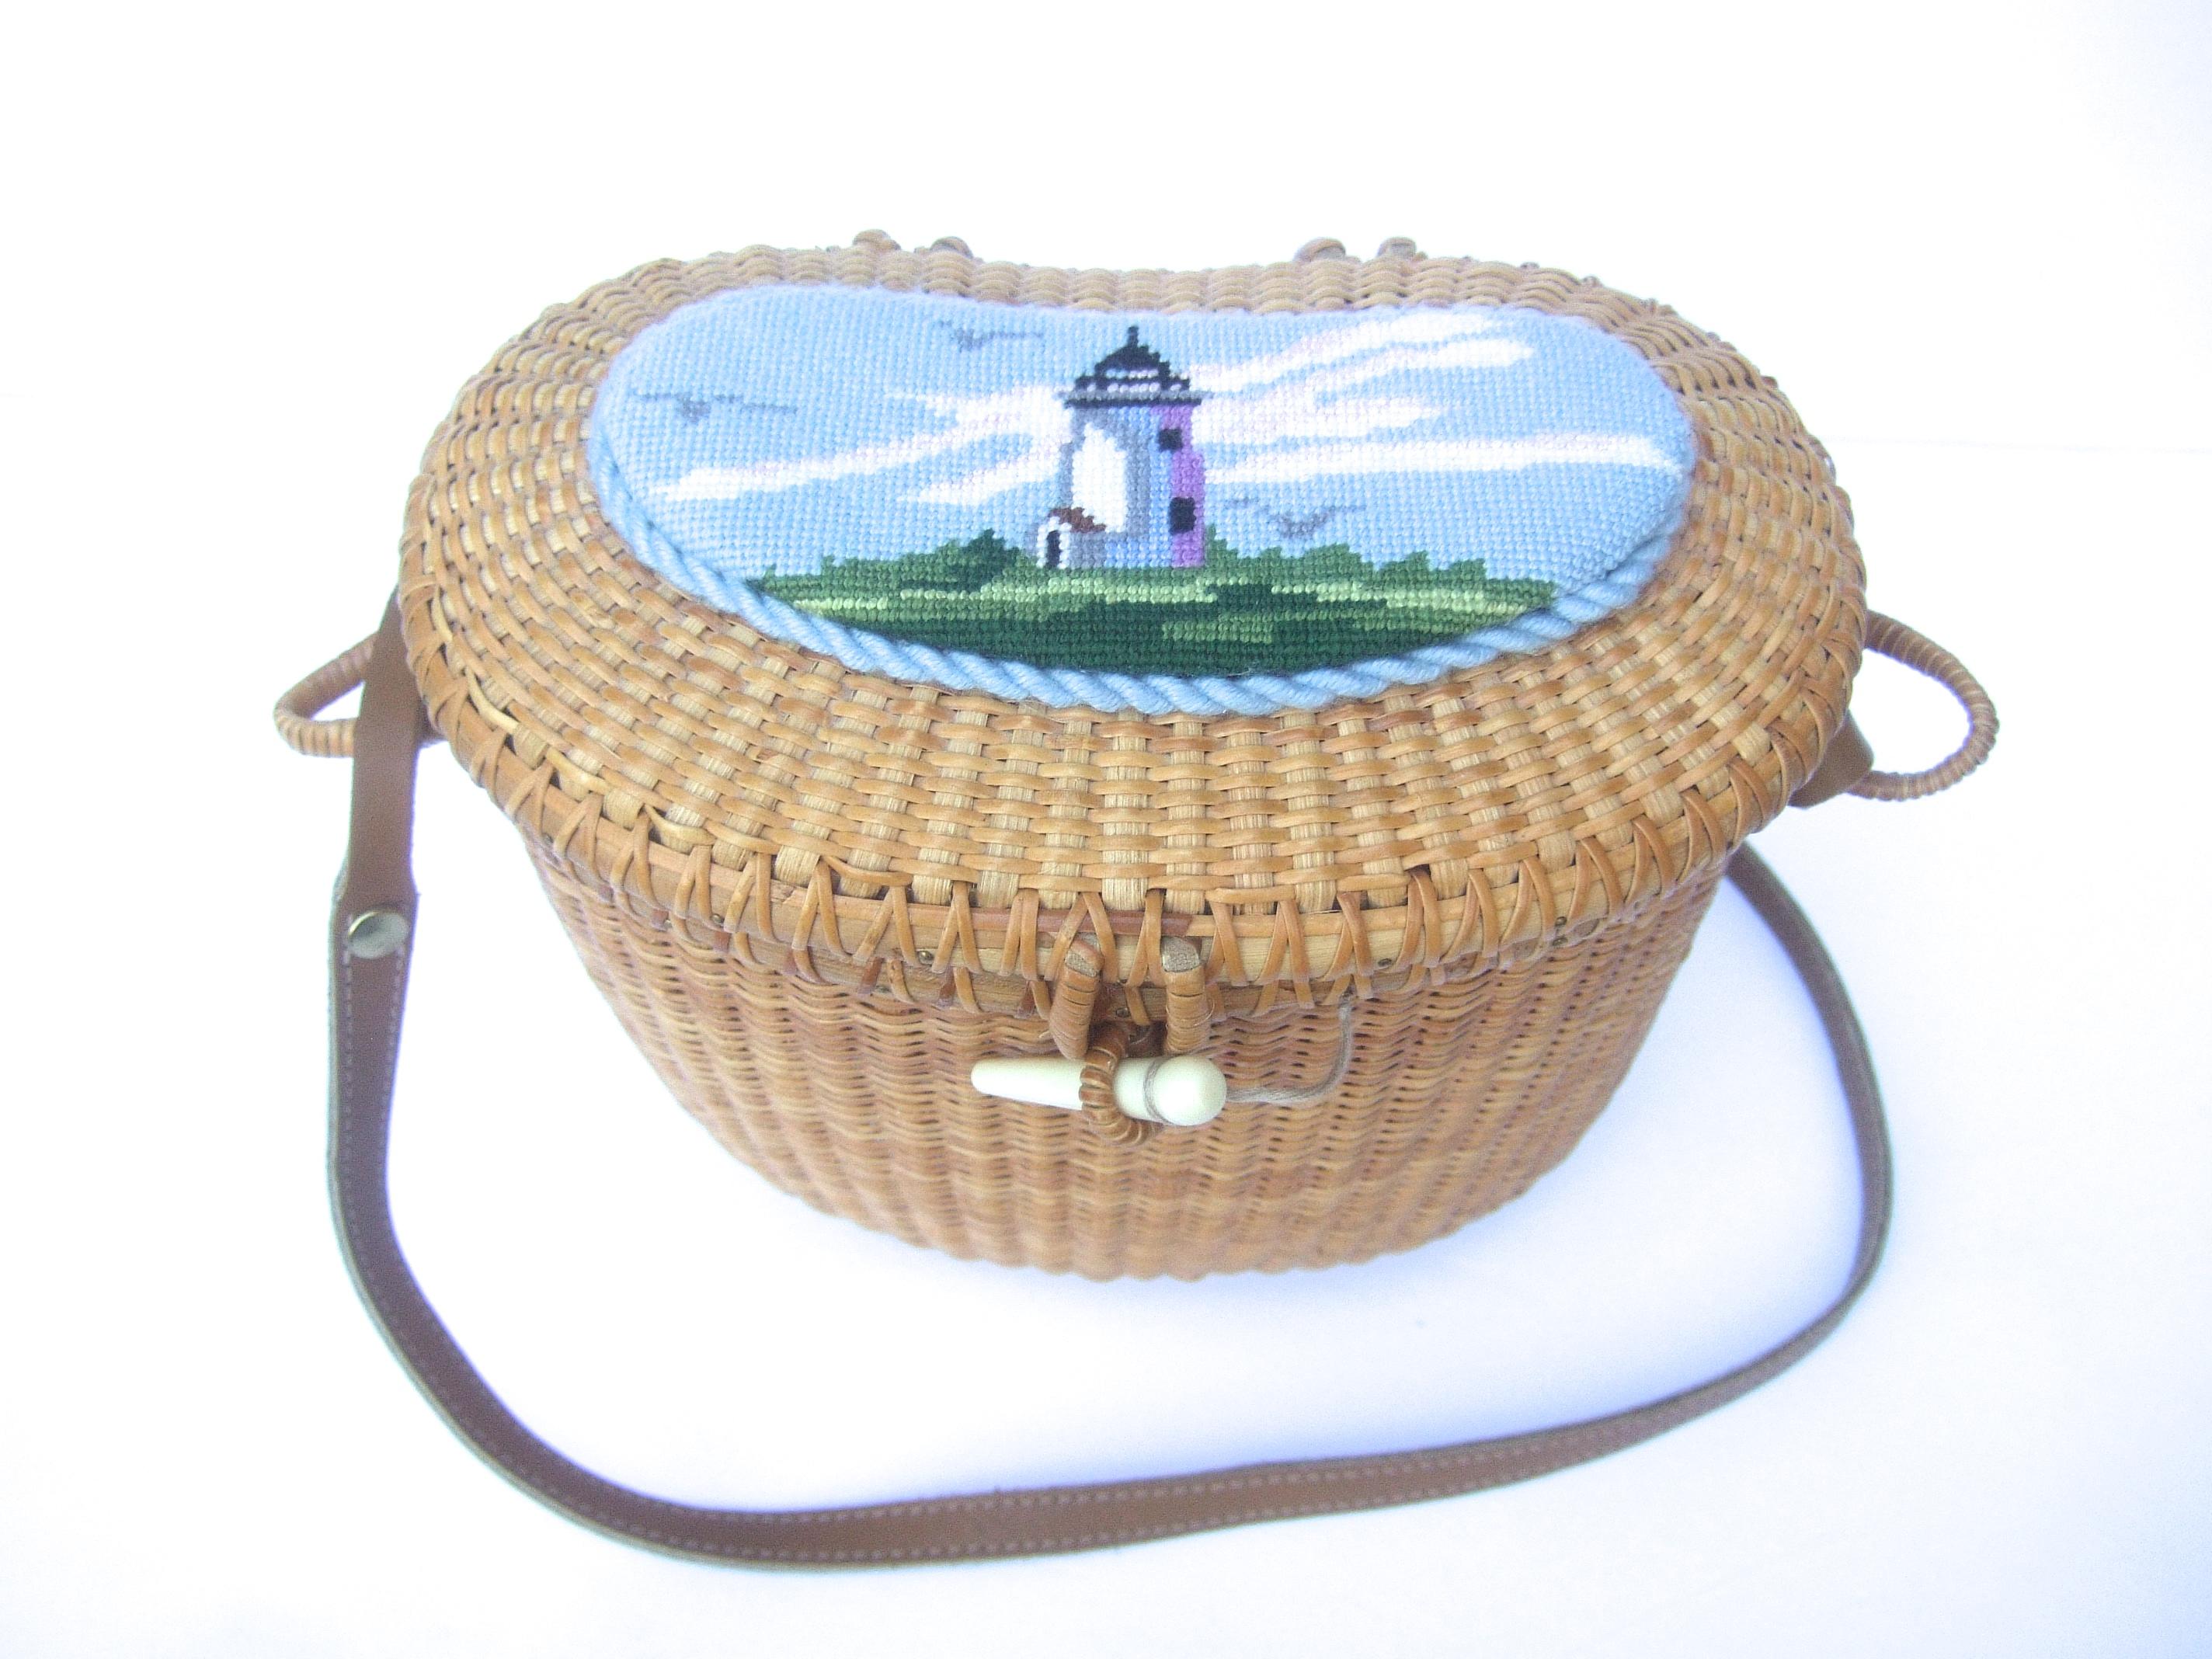 Nantucket style woven wicker rattan shoulder bag with needlepoint lid cover c 1980s
The charming light-weight woven wicker basket style shoulder bag is designed with a needlepoint lighthouse scene on the lid cover

Secures closed with a faux resin